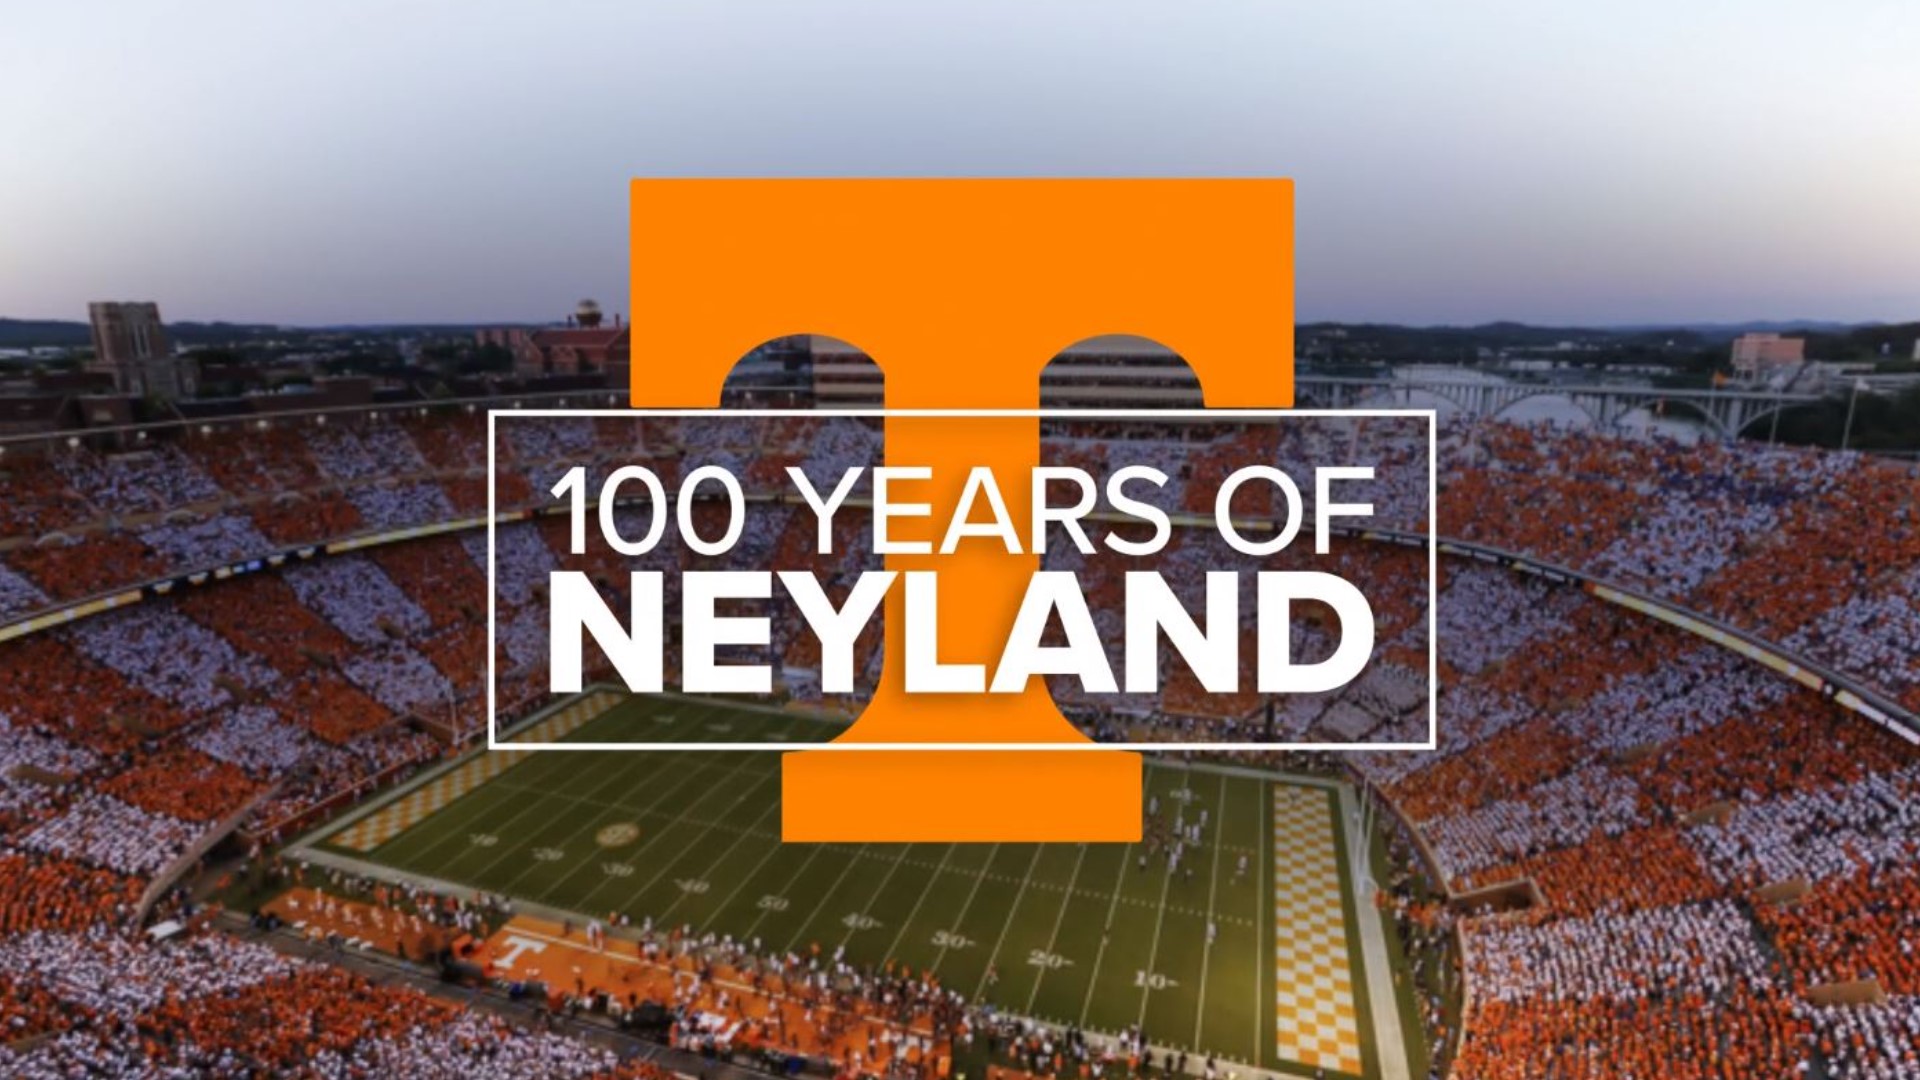 In its 100 years, the stadium has grown from a field built by students and faculty to one of the premier stadiums in all of college football.